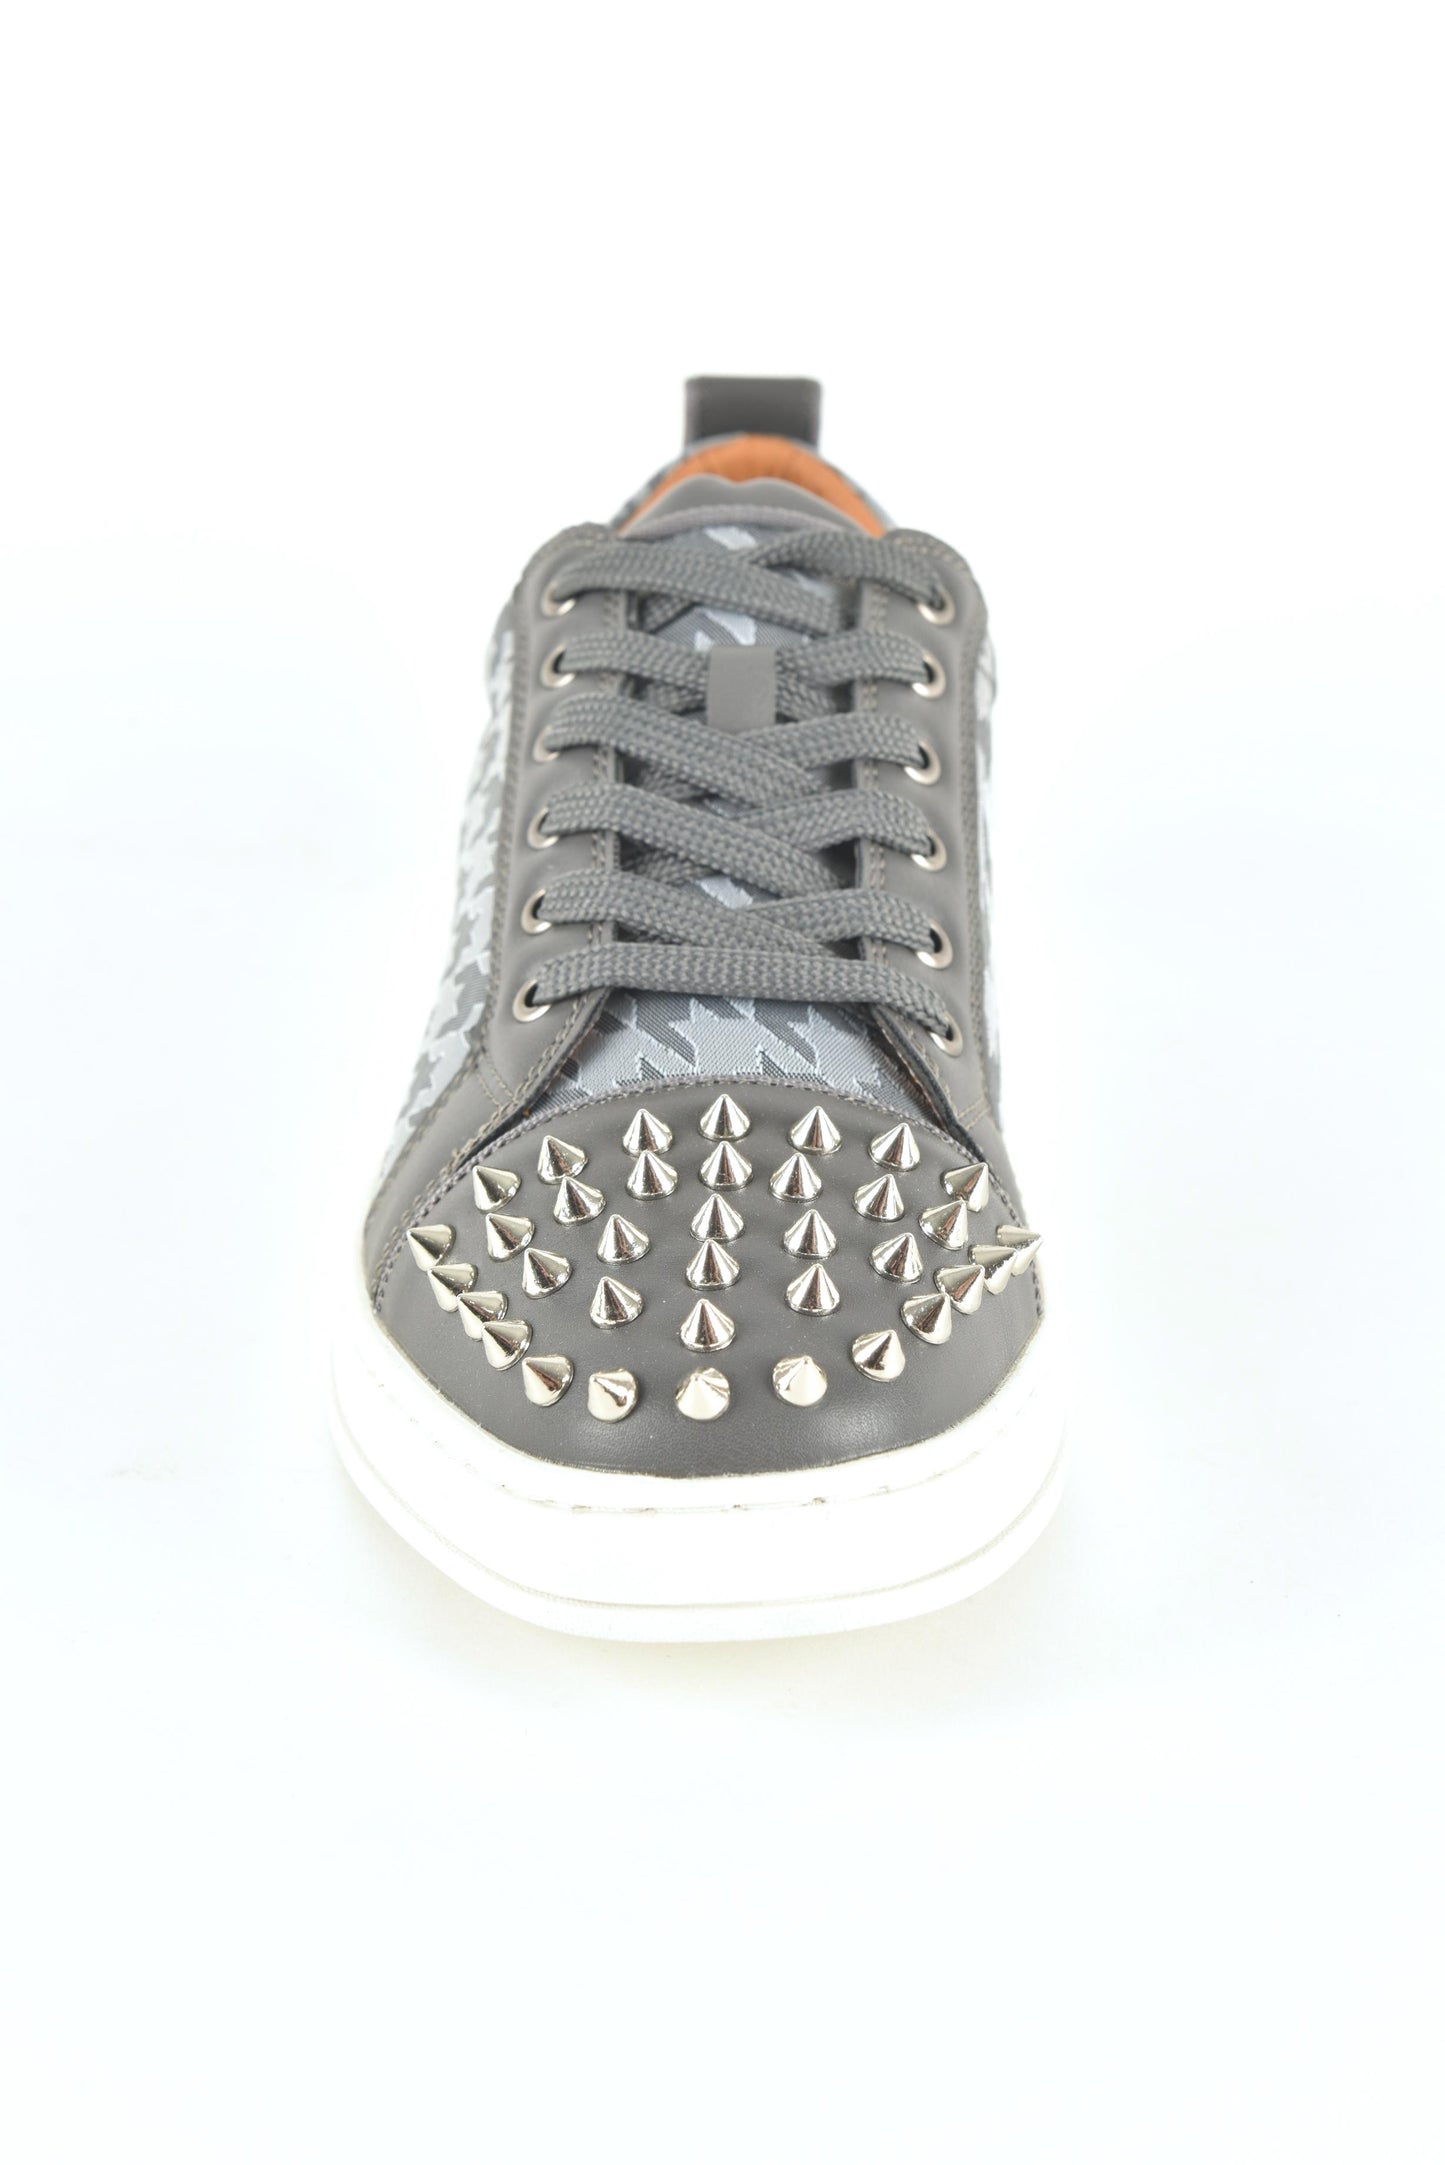 Mens Multi Fabric Low-Top Sneaker With Spikes